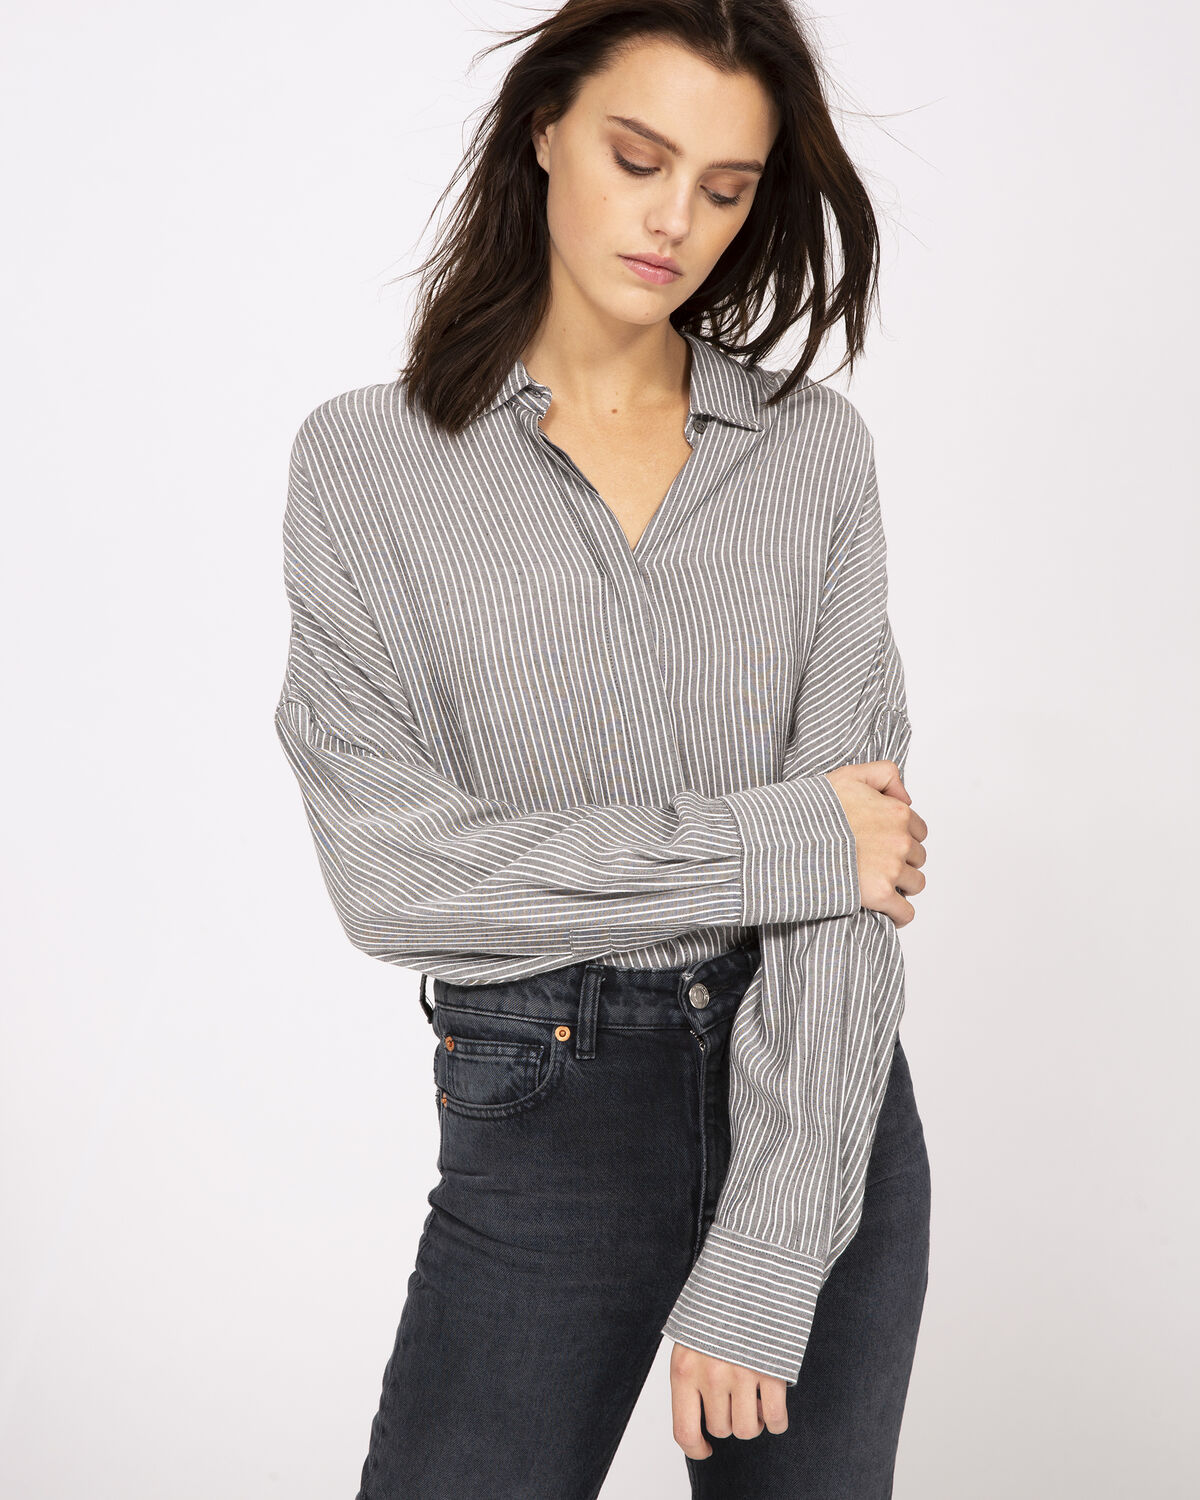 Photo of IRO Paris Markina Shirt Black And White - This Grey Striped Shirt Is Distinctive For Its Oversized Design. Fitted Into Trousers, It Can Be Worn For All Types Of Occasions. Shirts-Tops